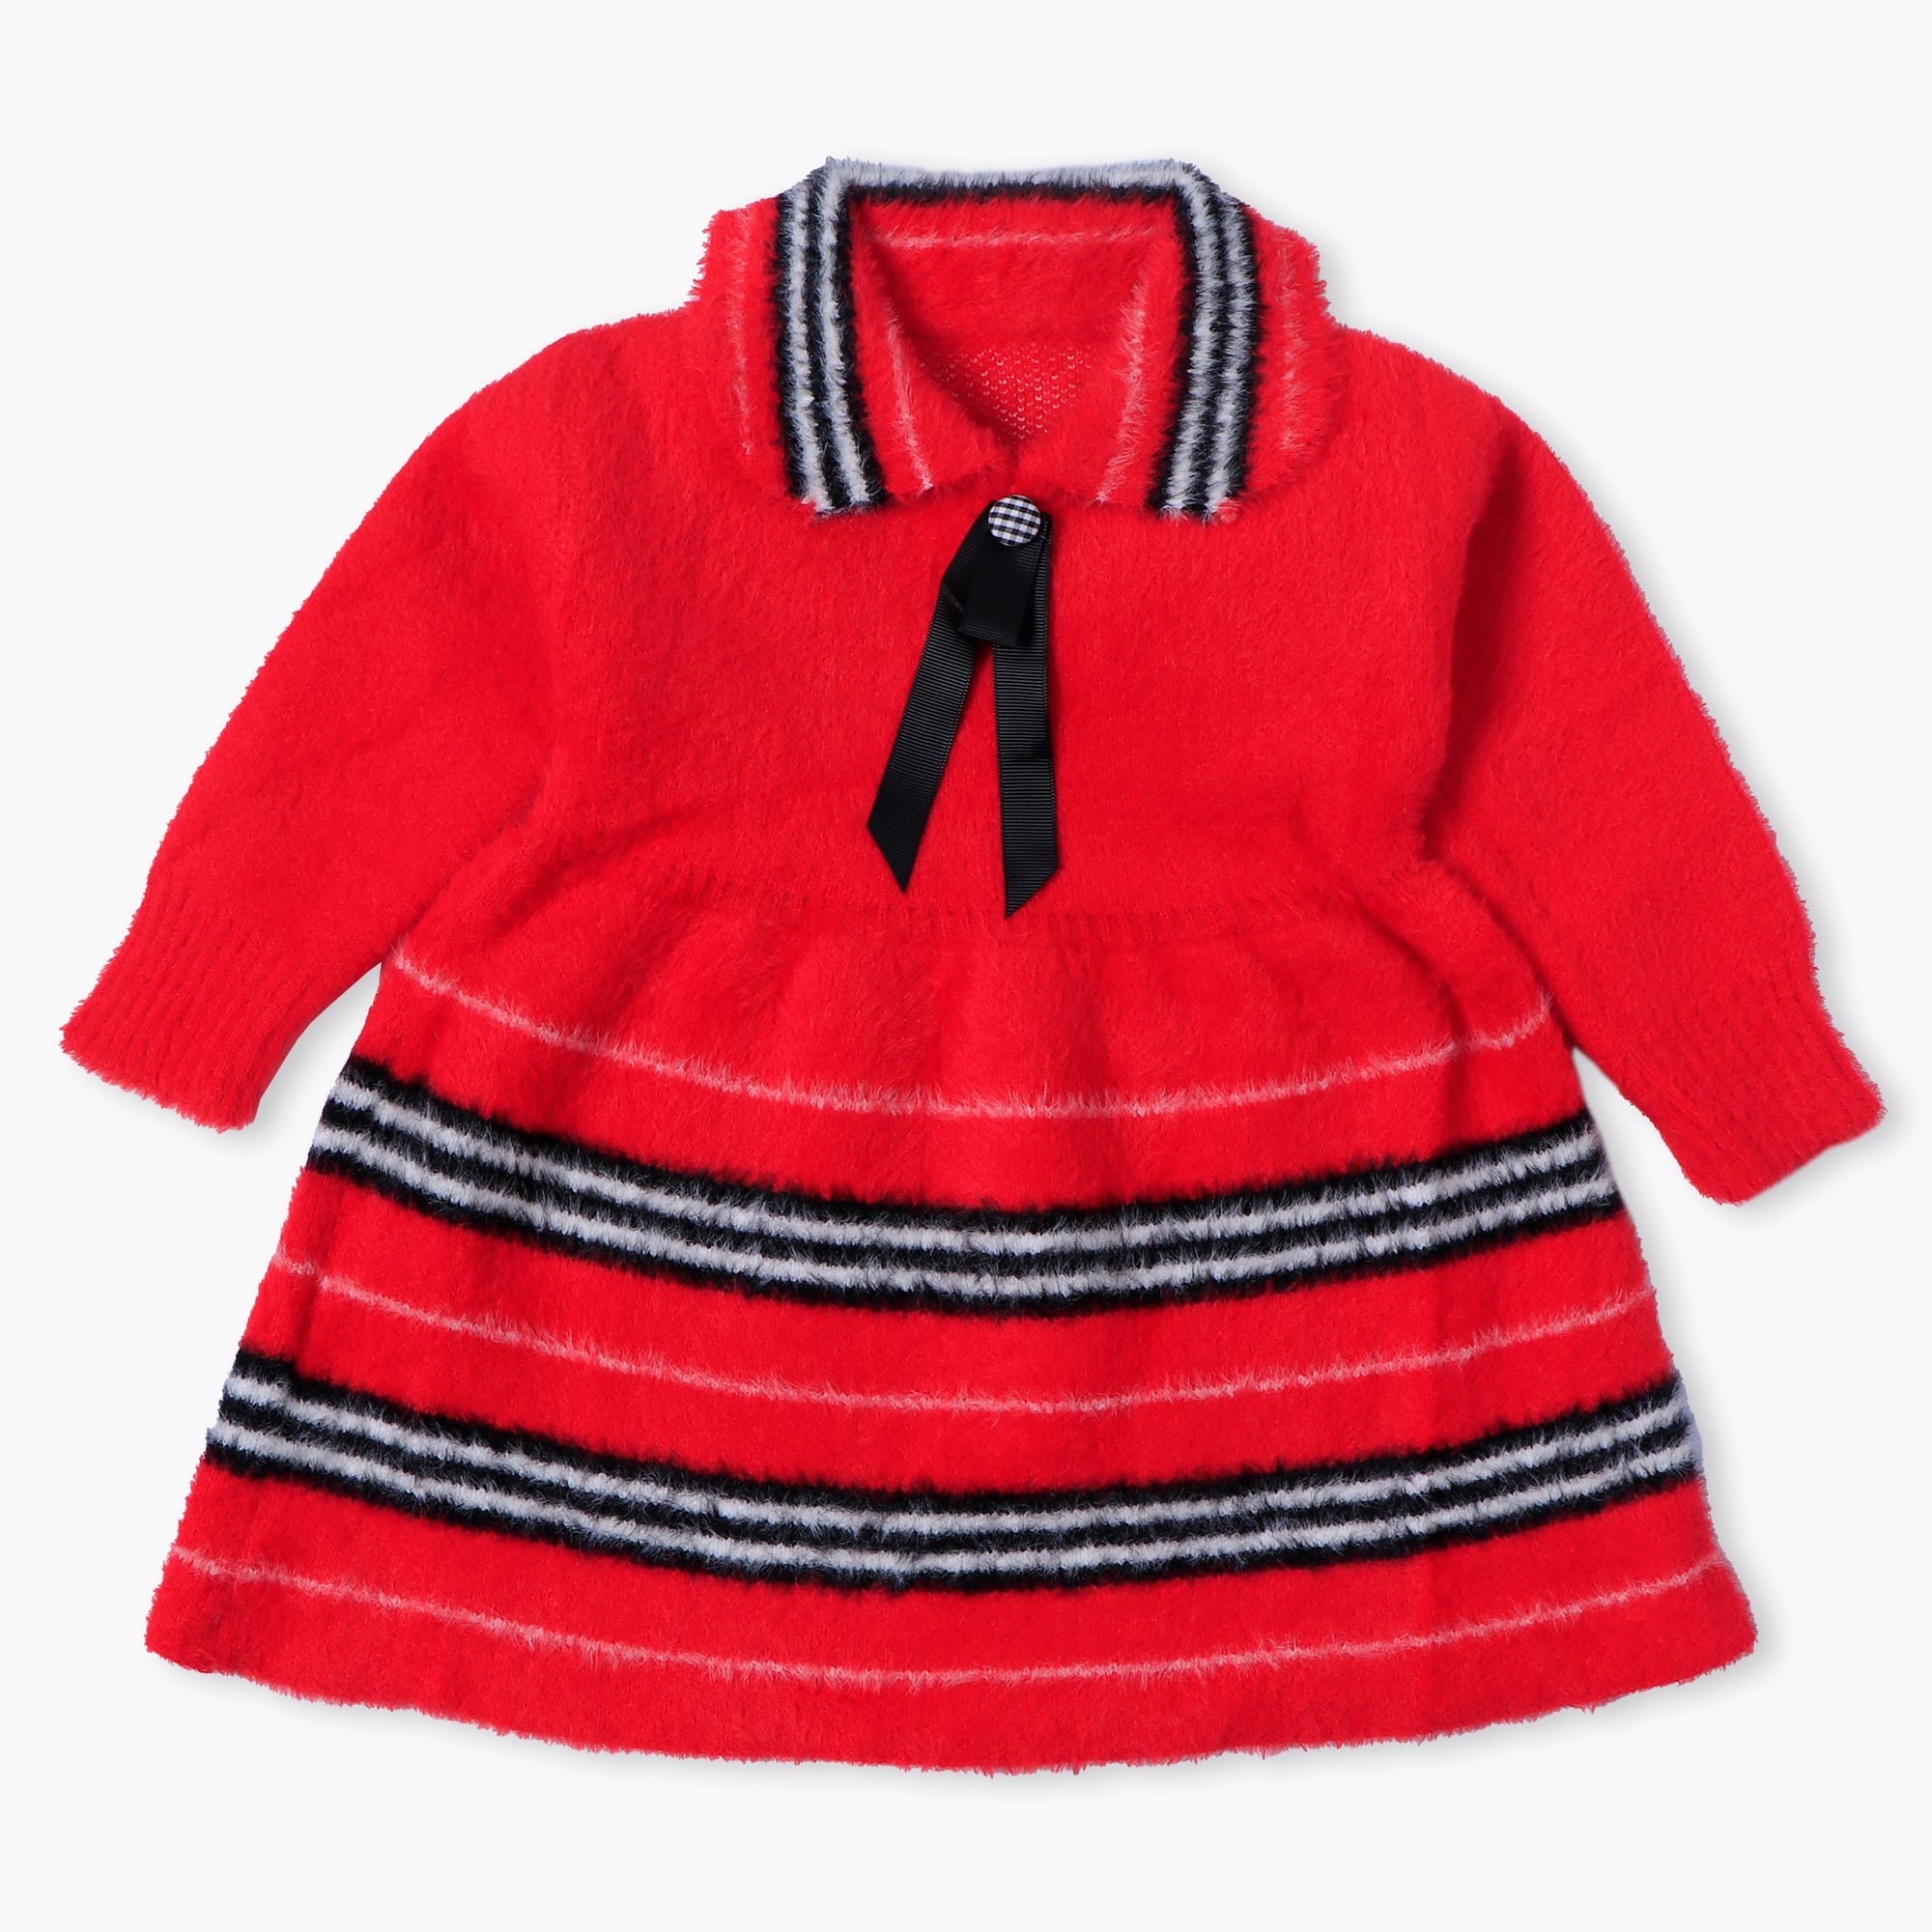 Red Striped Tunic